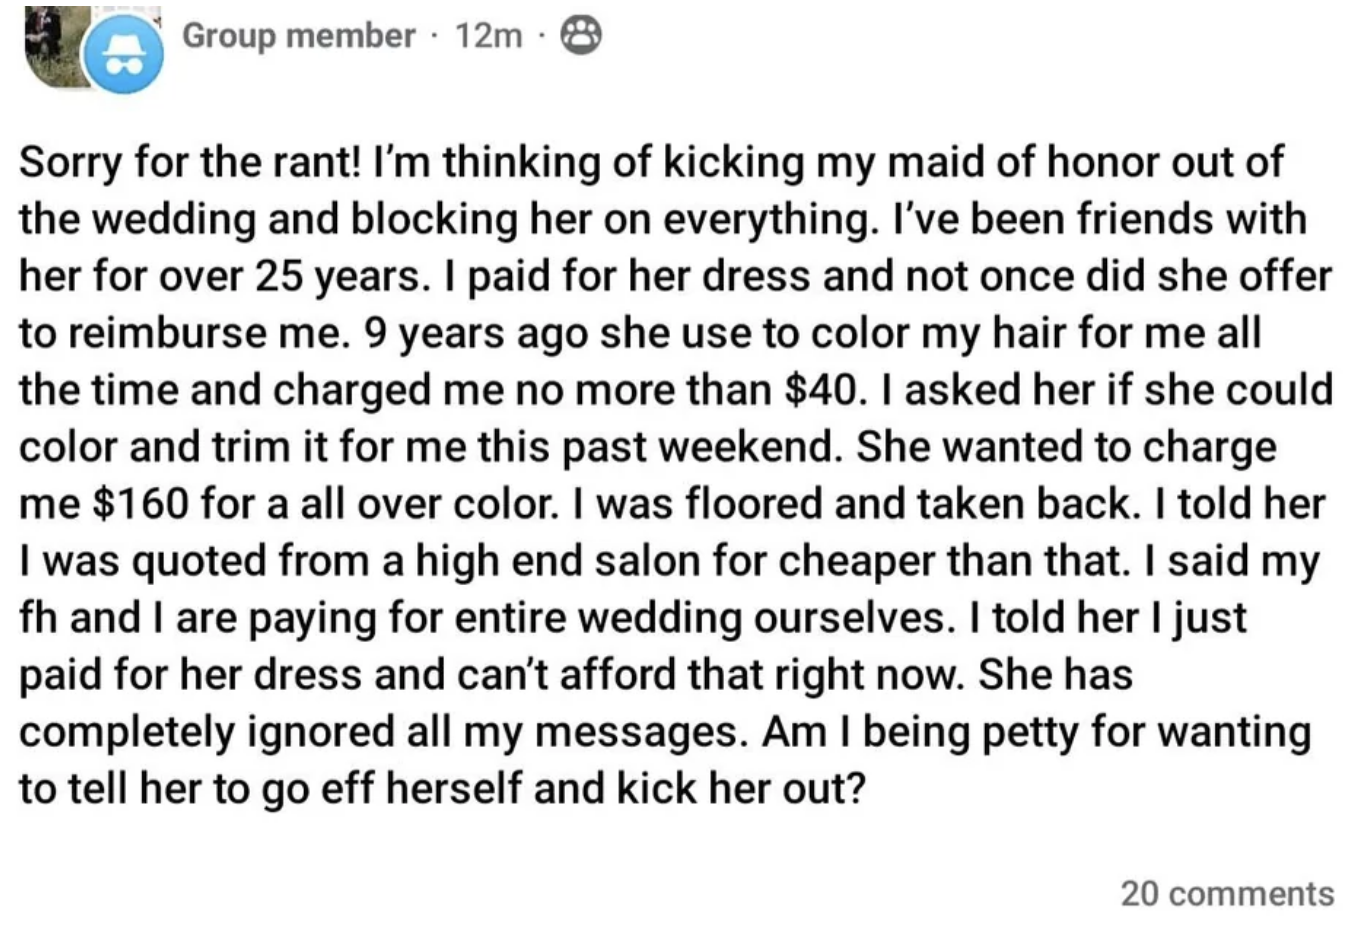 bride saying her friend was her stylist years ago and now for her wedding wants to charge her a higher price